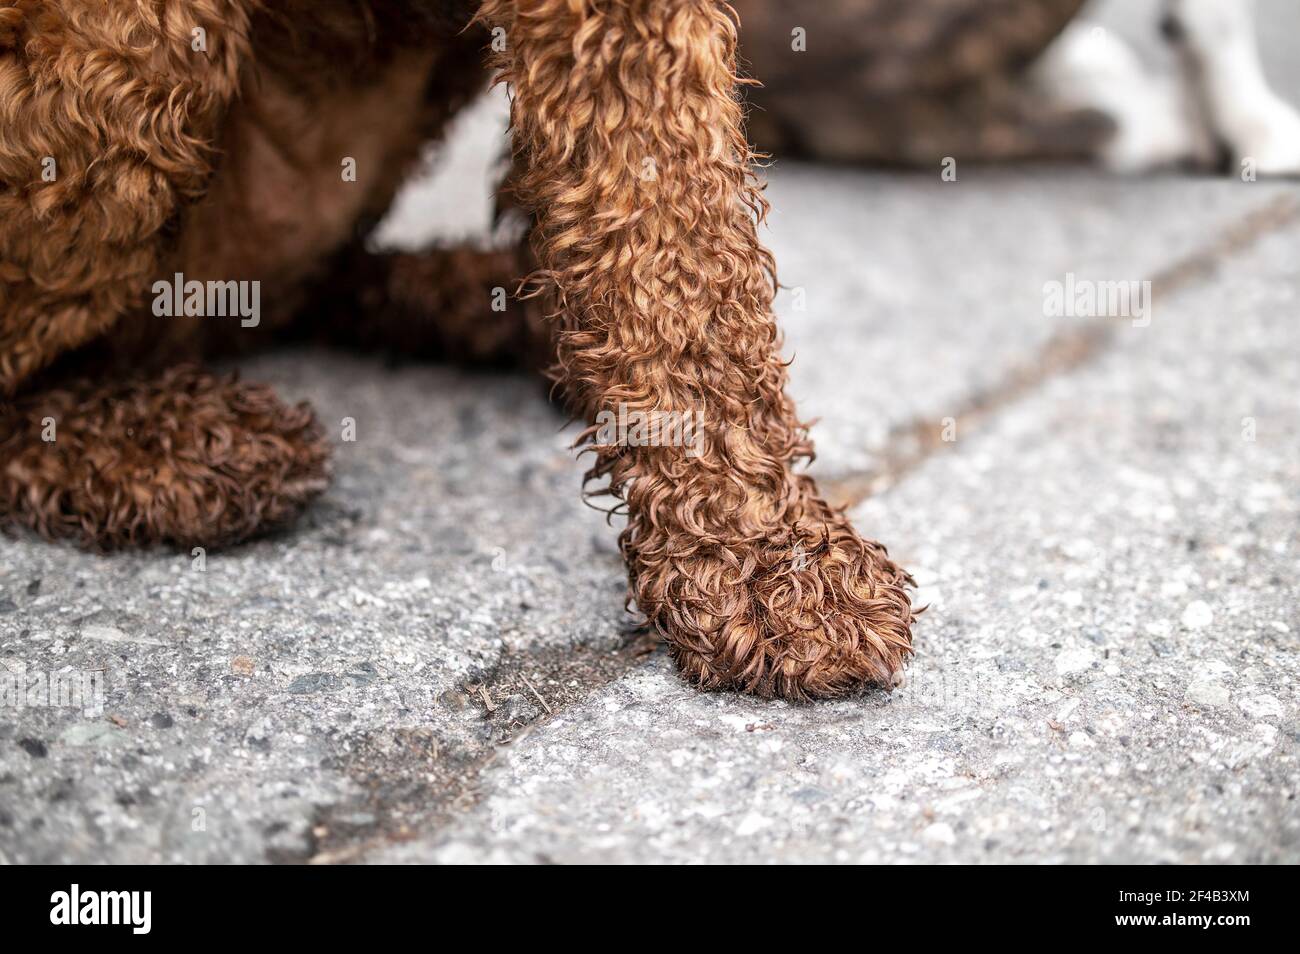 Dirty dog paws after running in the forest or wet ground. Wet and muddy Labradoodle dog front legs. Dog needs a dry rub with towel, cleaning or a bath Stock Photo